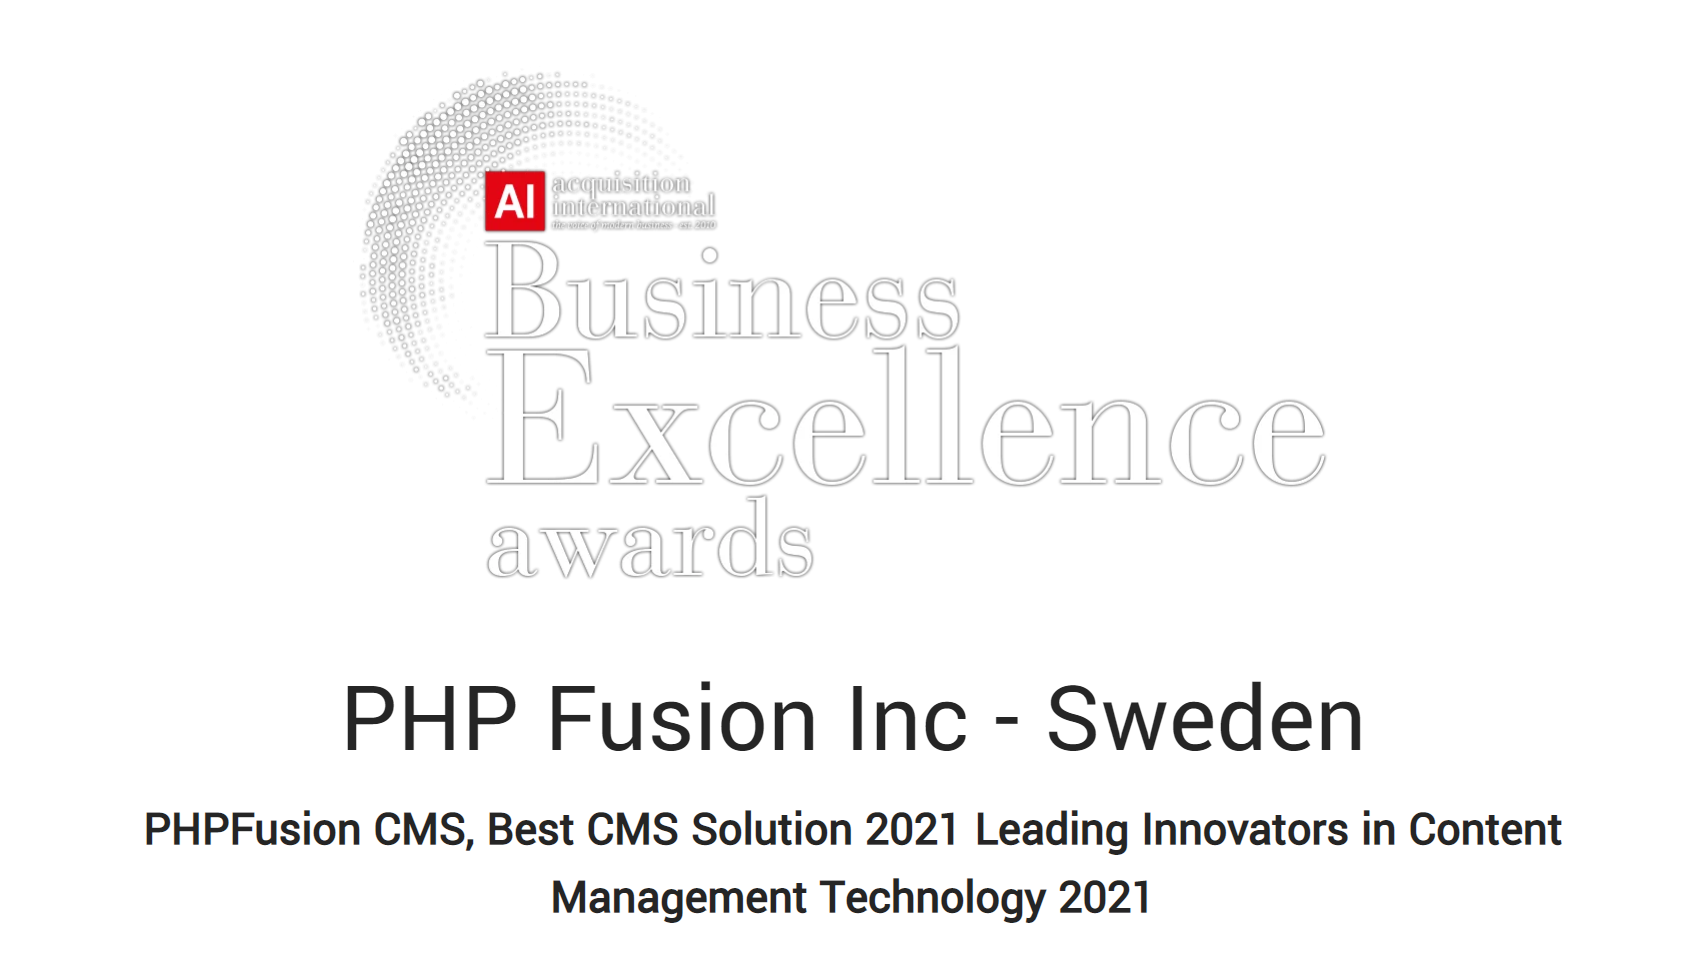 Best CMS Solution 2021 - PHPFusion